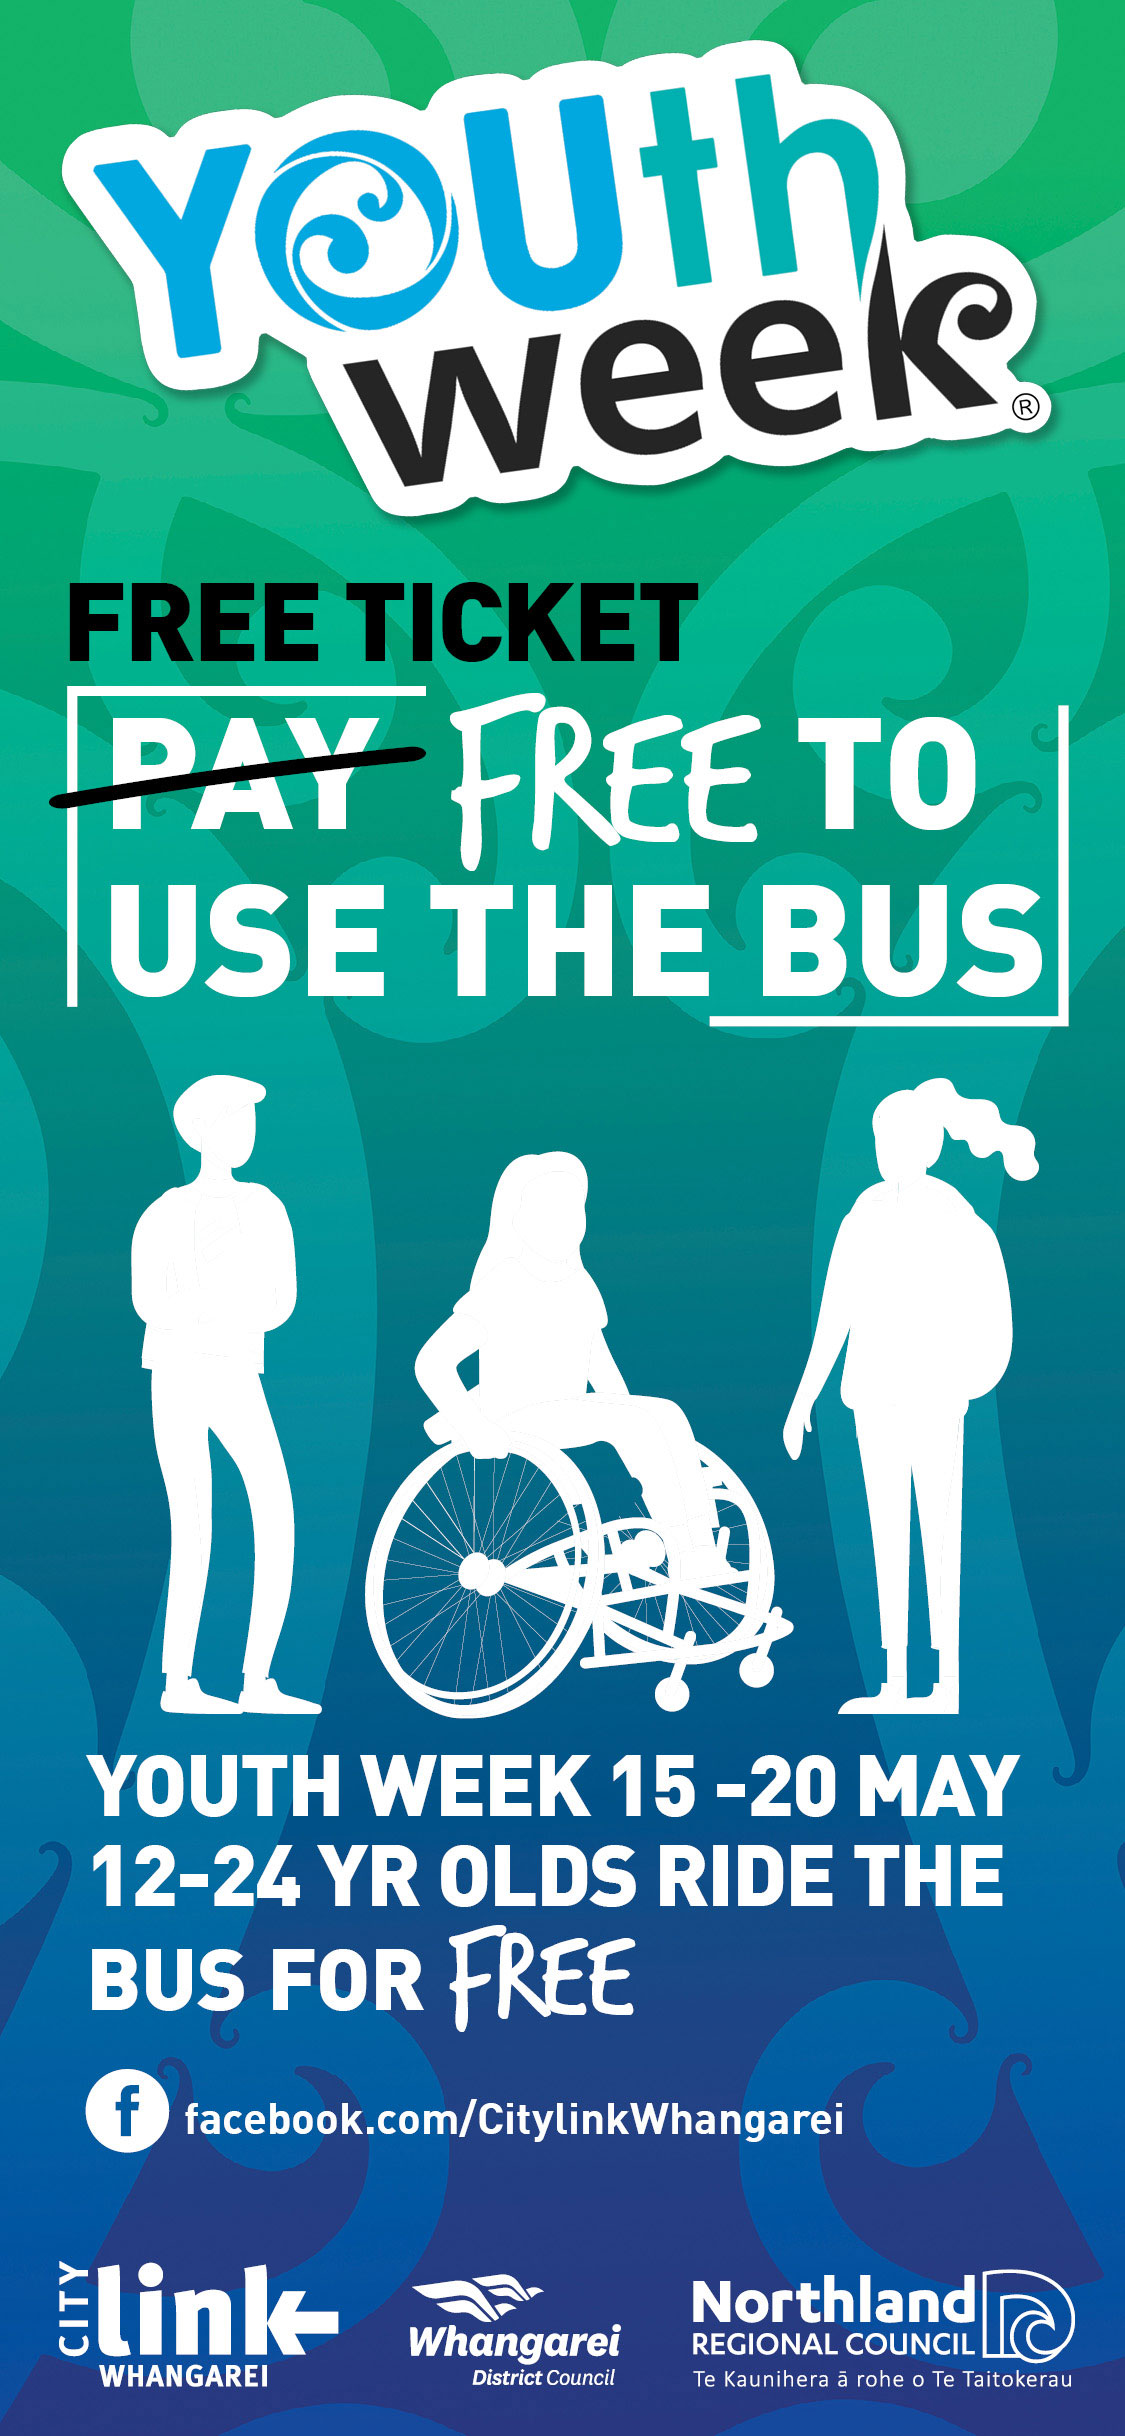 Youth week E ticket to use the bus 15-20 May 2023.